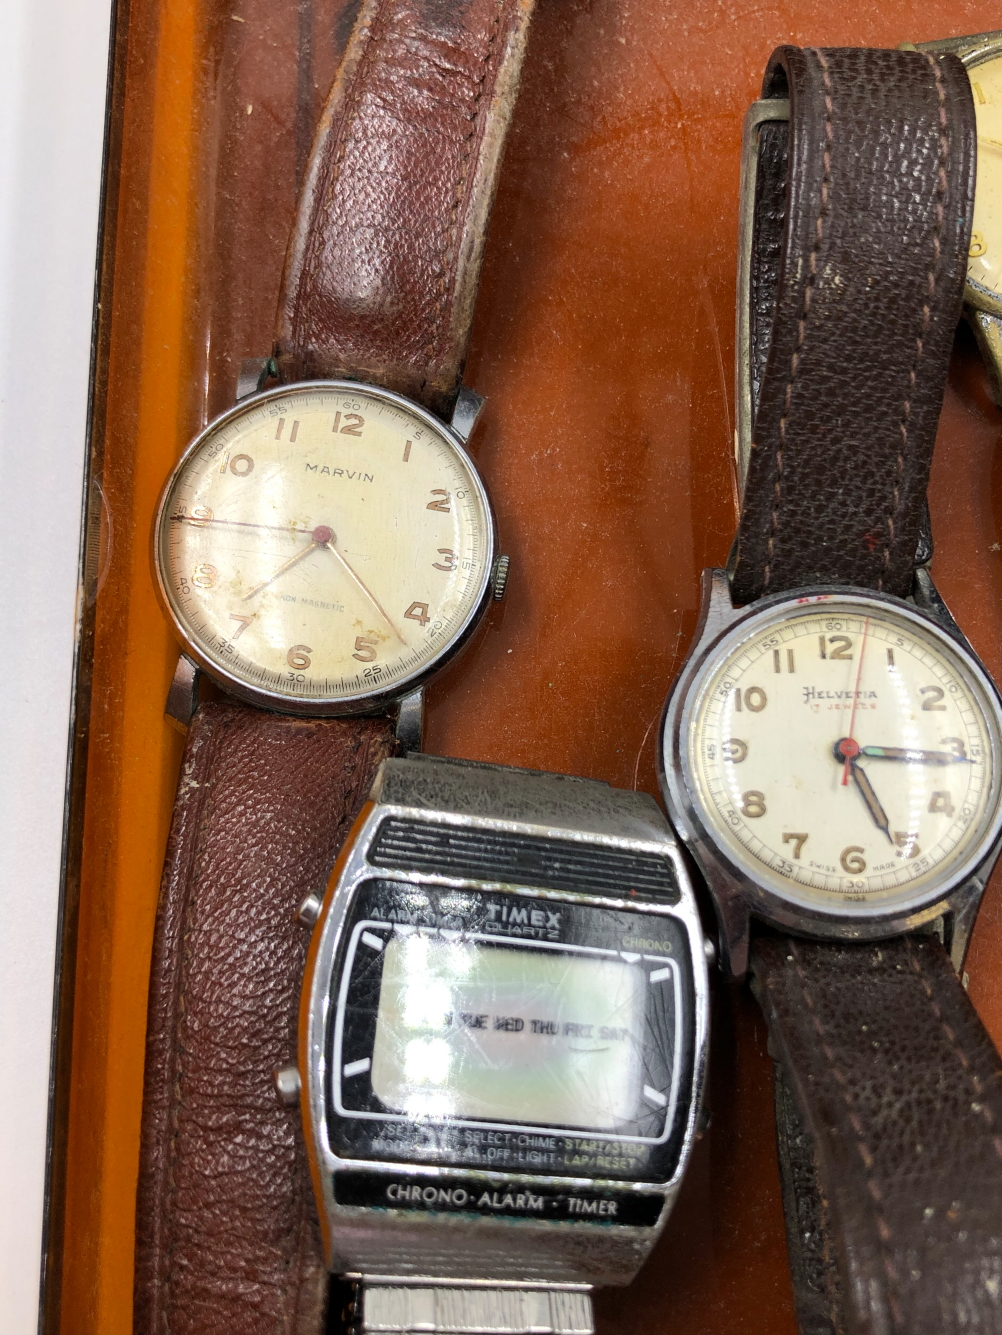 A COLLECTION OF MOSTLY VINTAGE WATCHES TO INCLUDE TISSOT, TIMES, MARVIN, HELVITIA, RECTA, SEIKO ETC. - Image 7 of 9